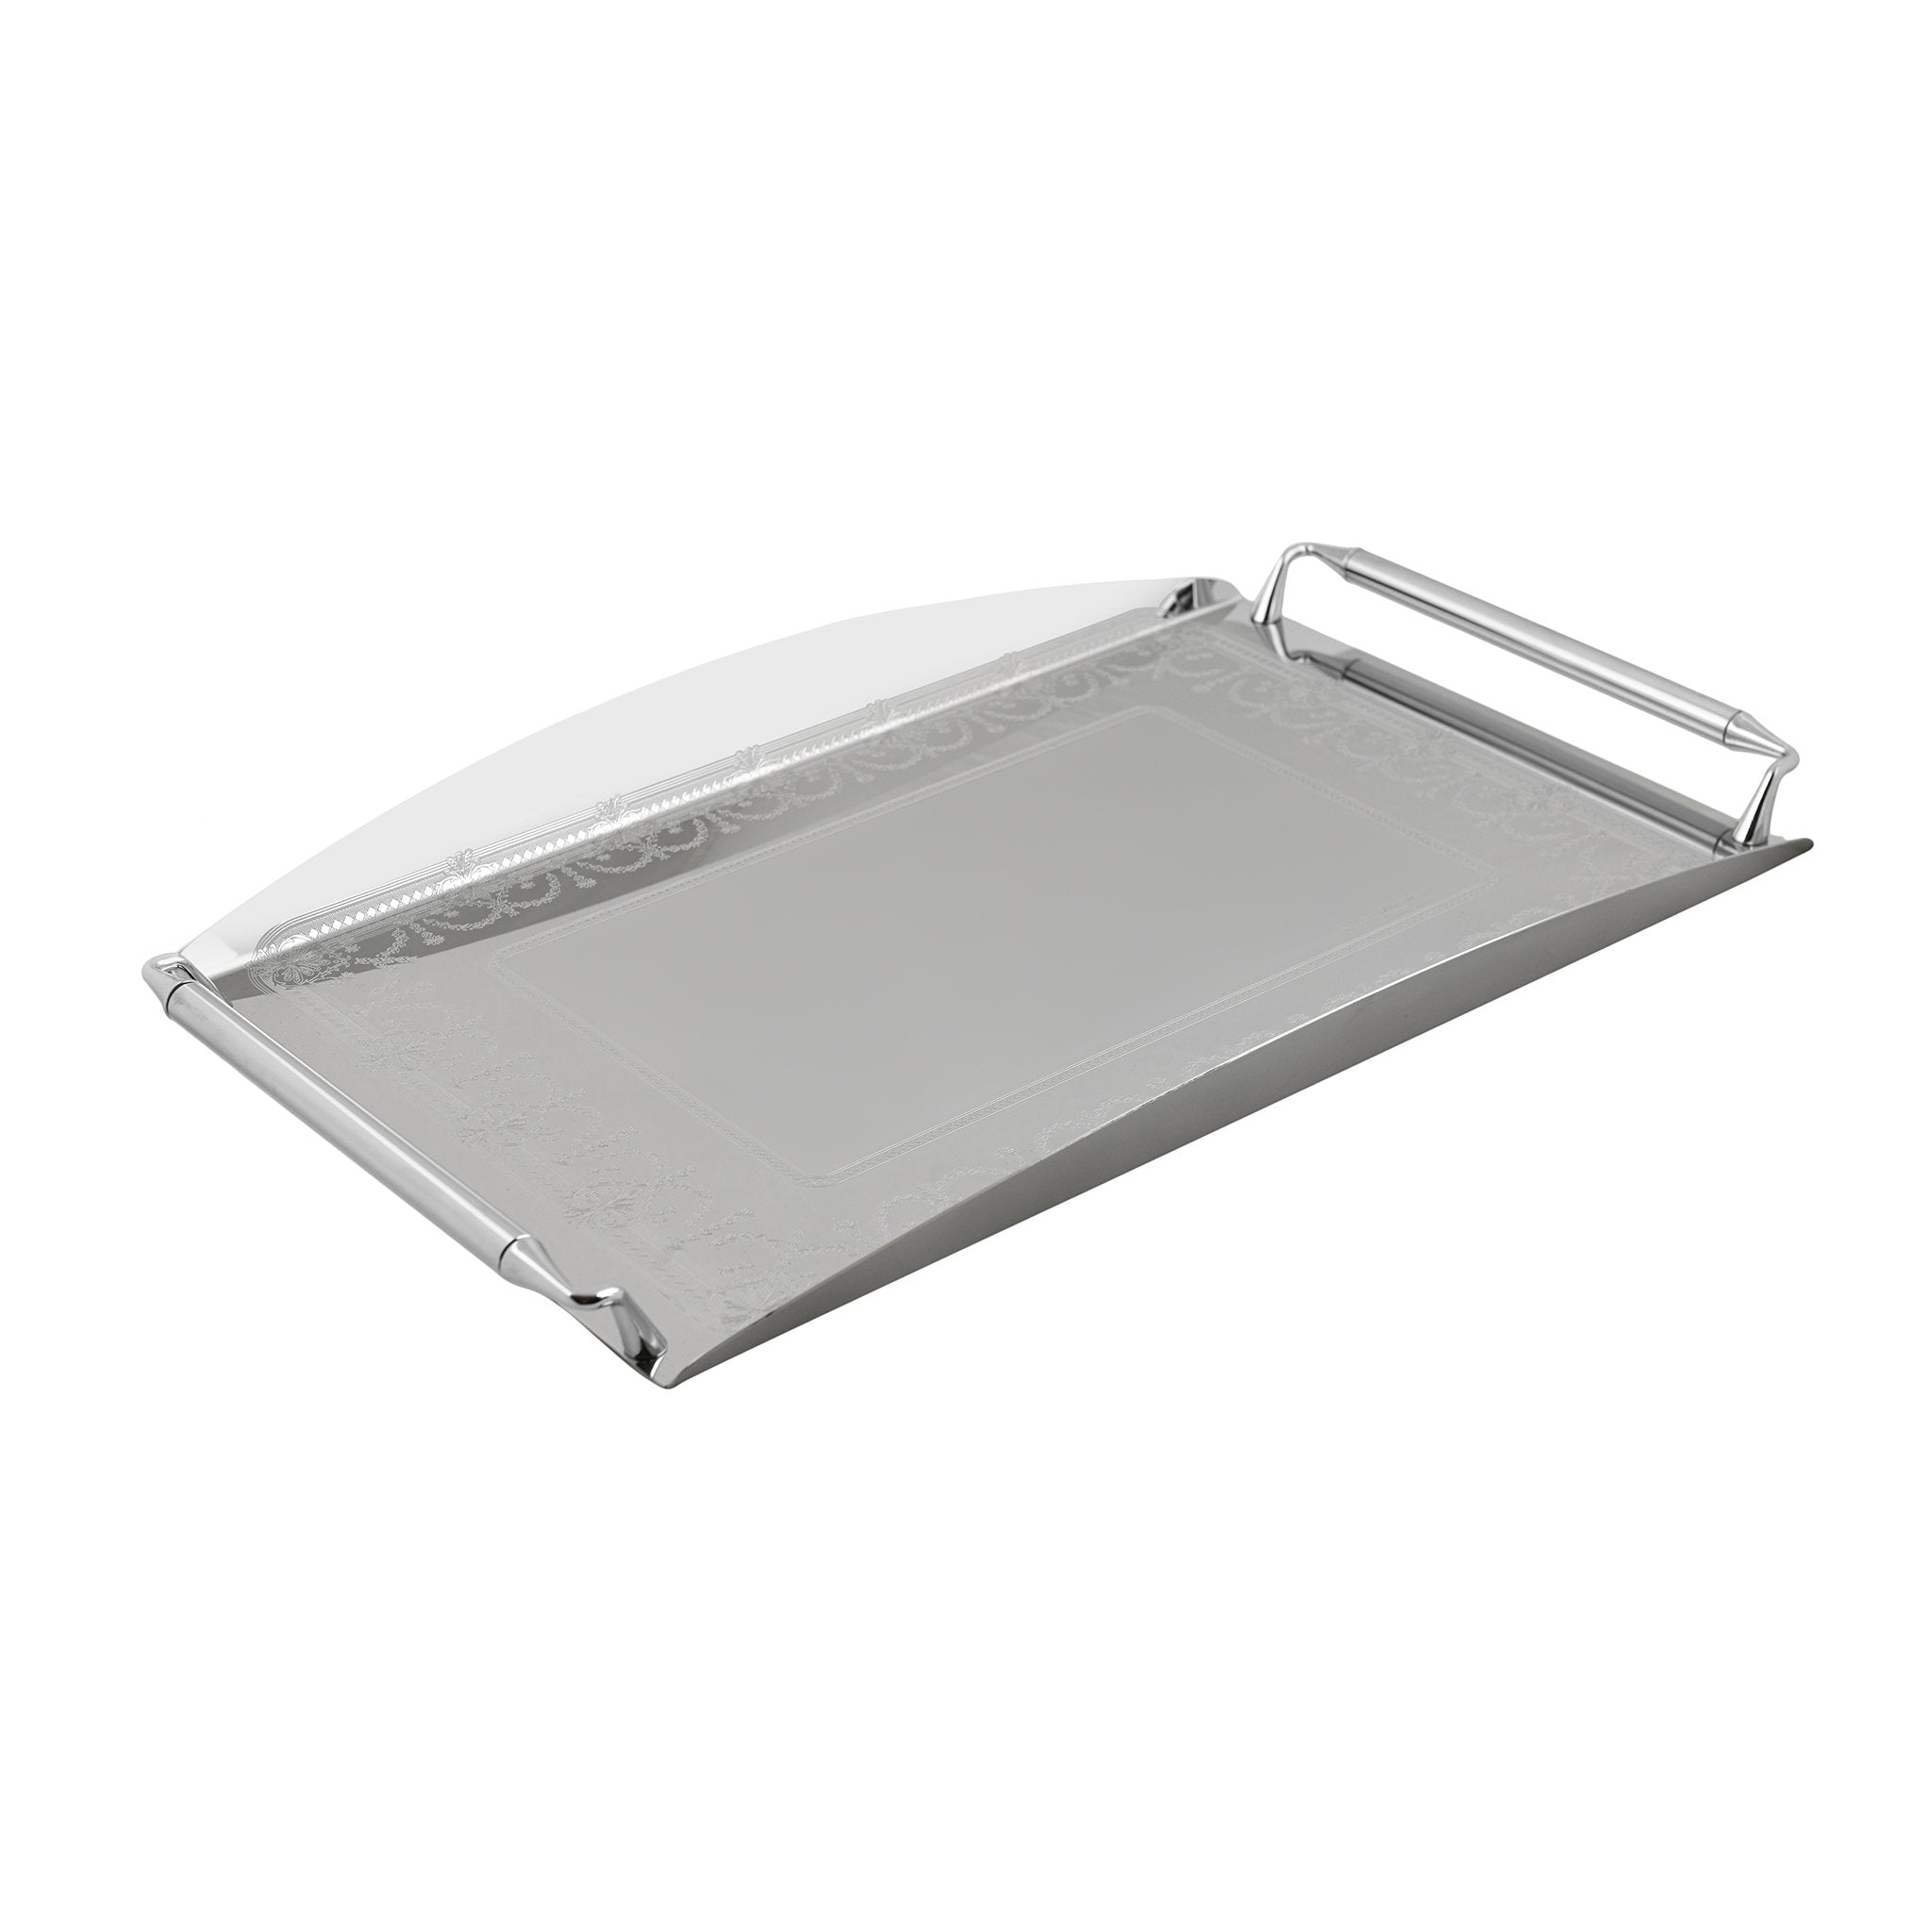 Elegant Gioiel - Rectangular Tray with Handles - Stainless Steel 18/10 - 50x34cm - 75000222